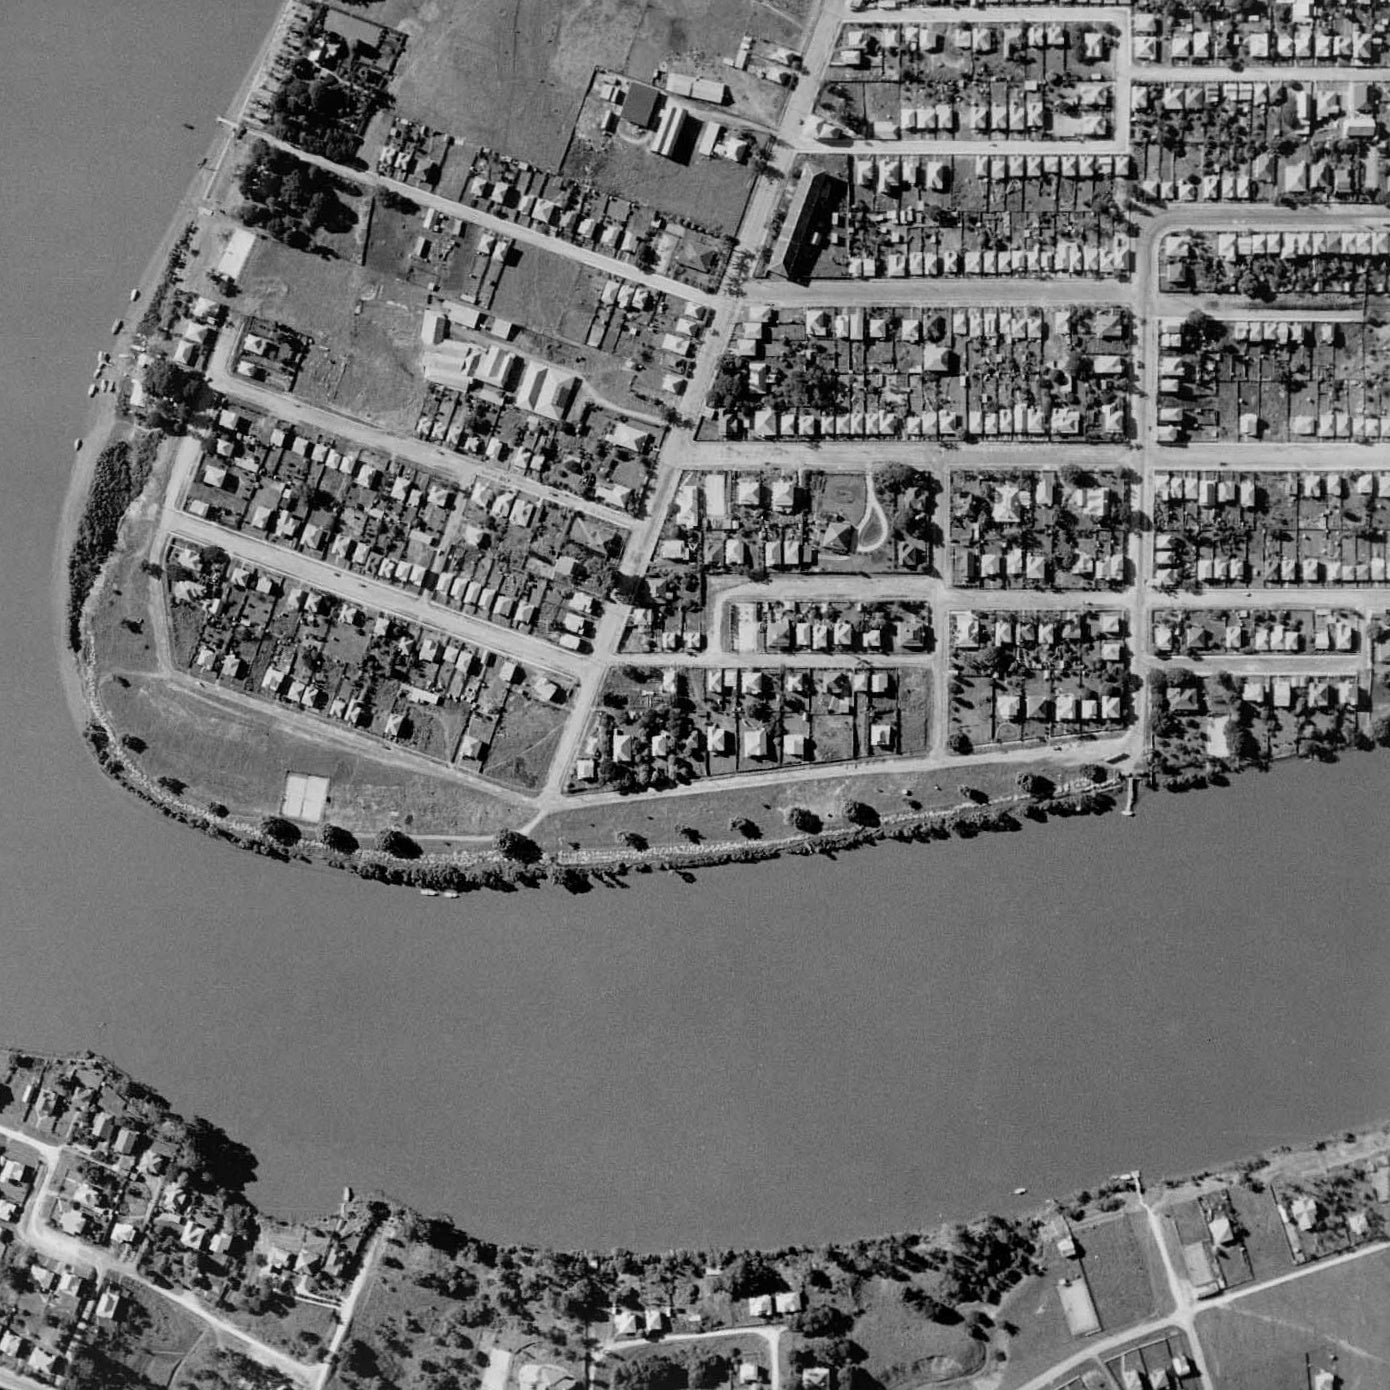 1936 West End - Aerial Photo - Hill End